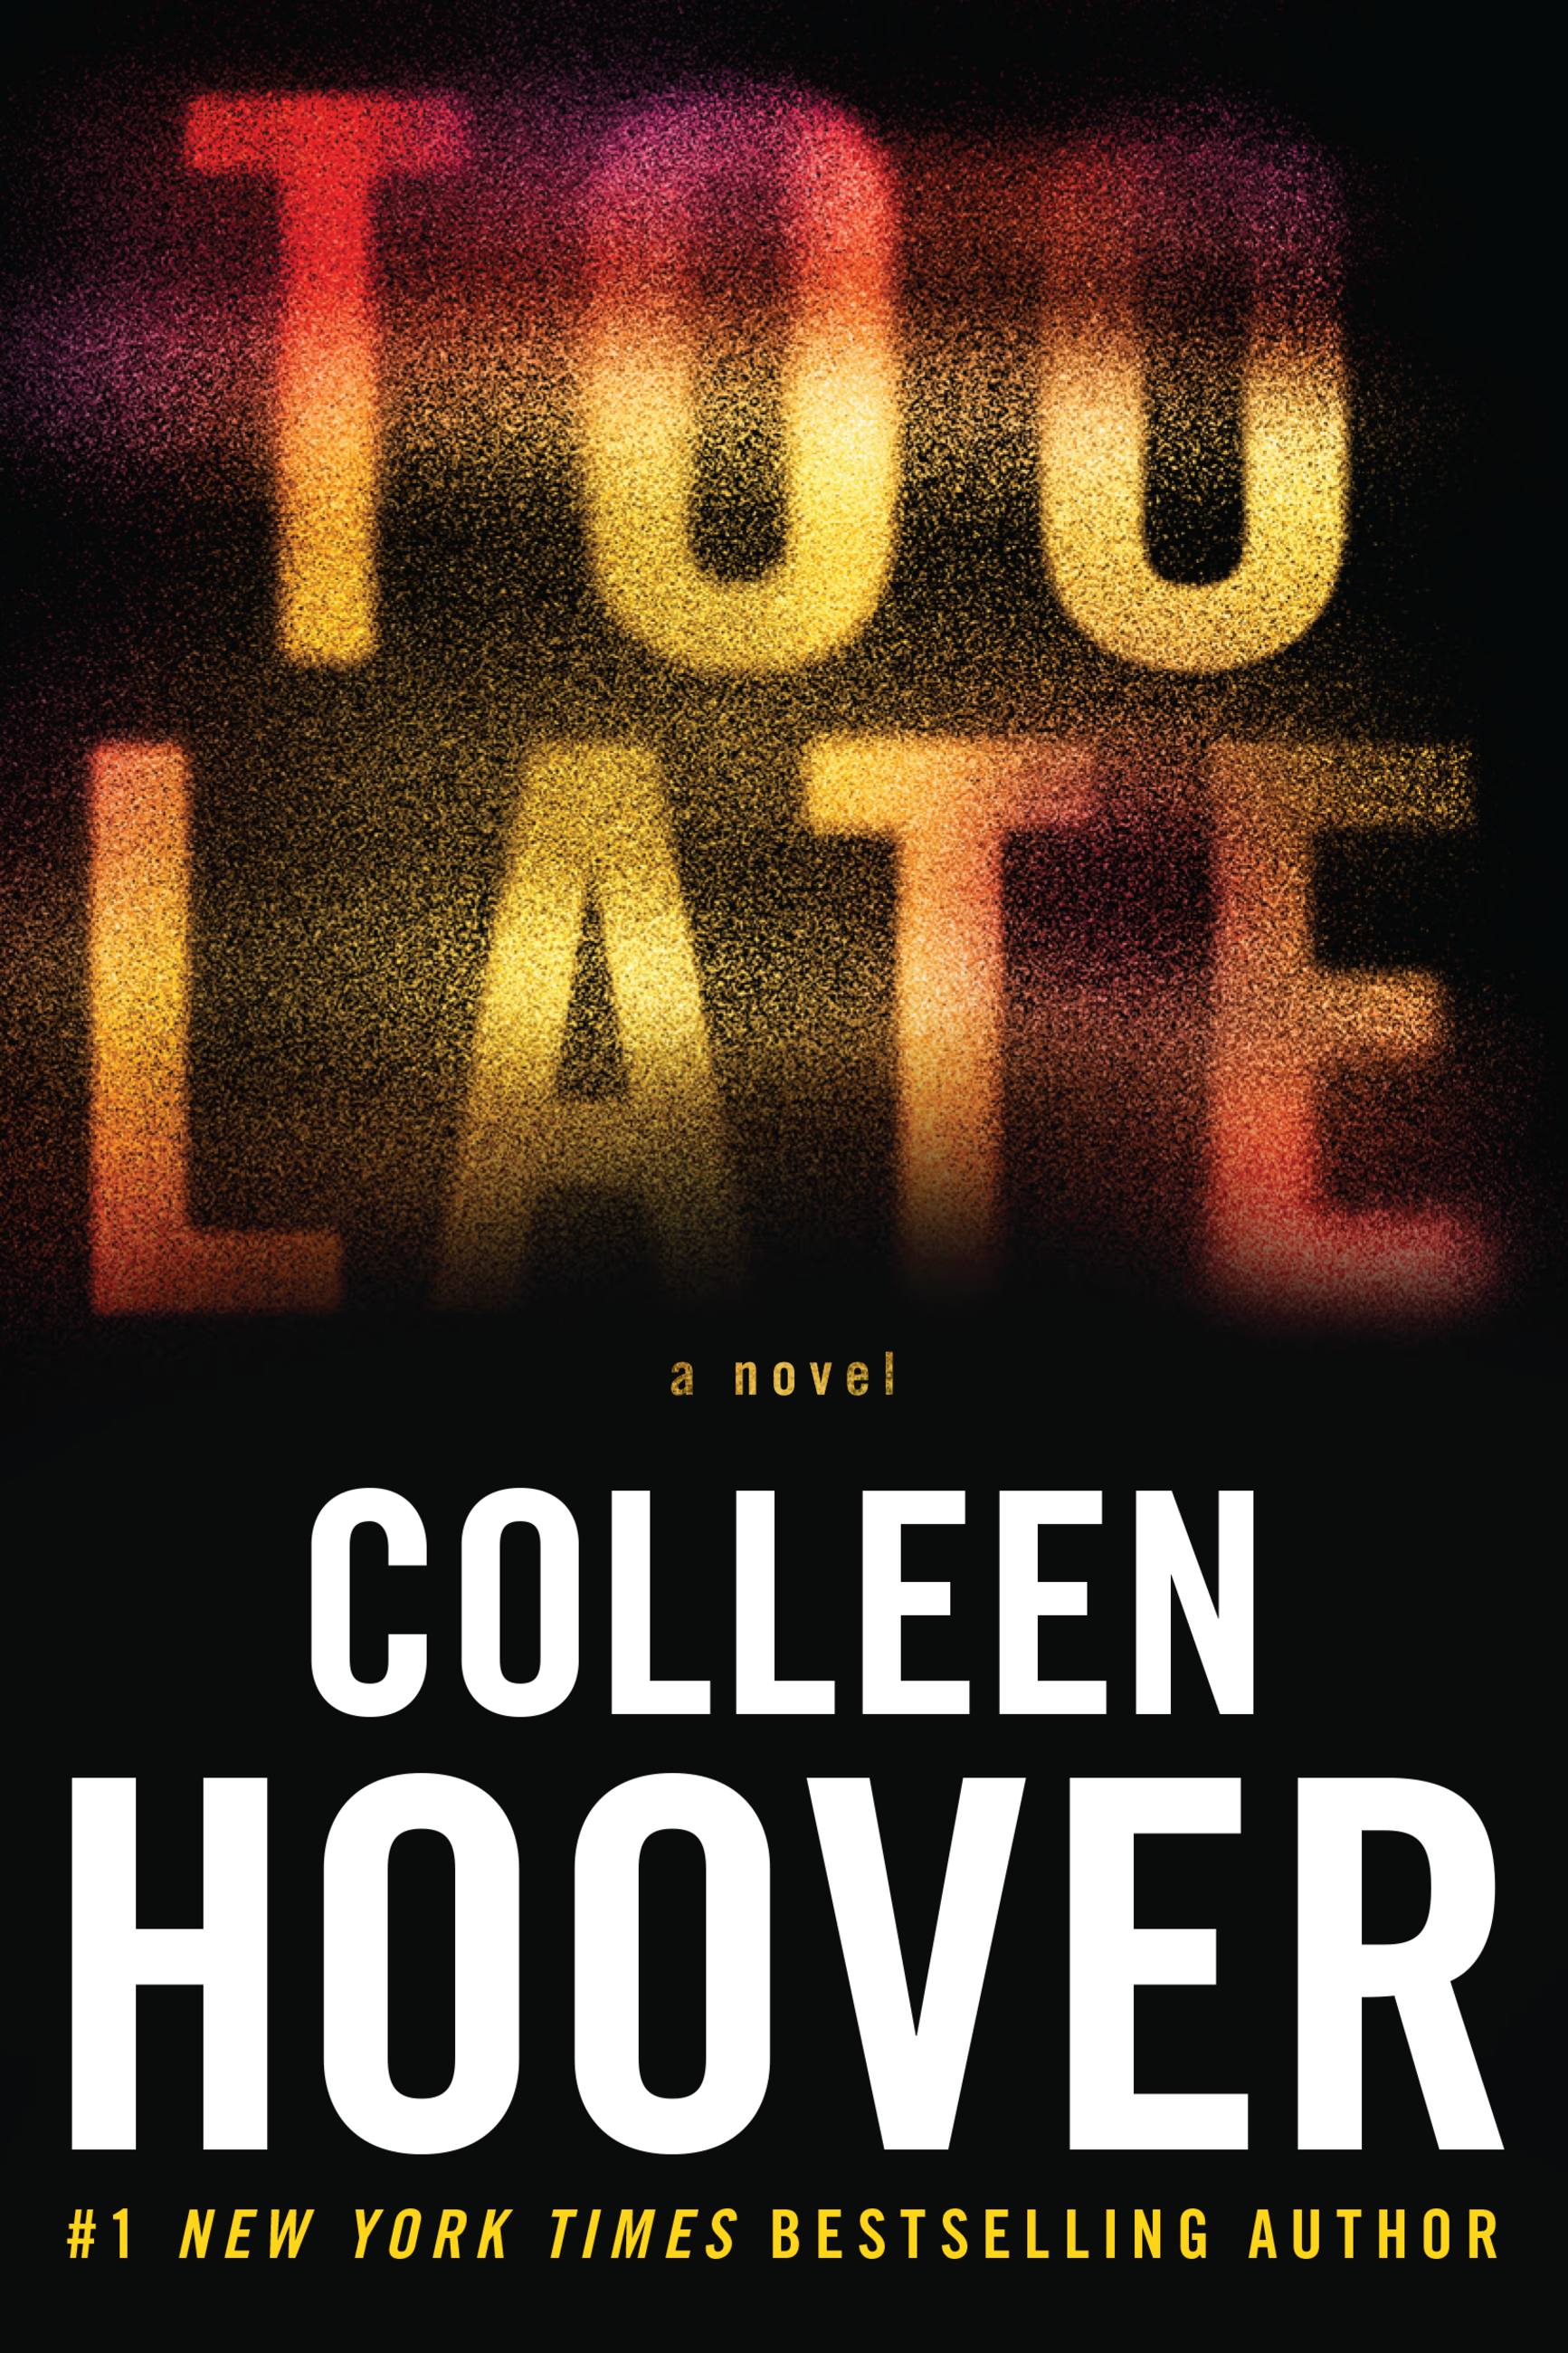 All Your Perfects : A Novel by Colleen Hoover (English, Paperback) New Book